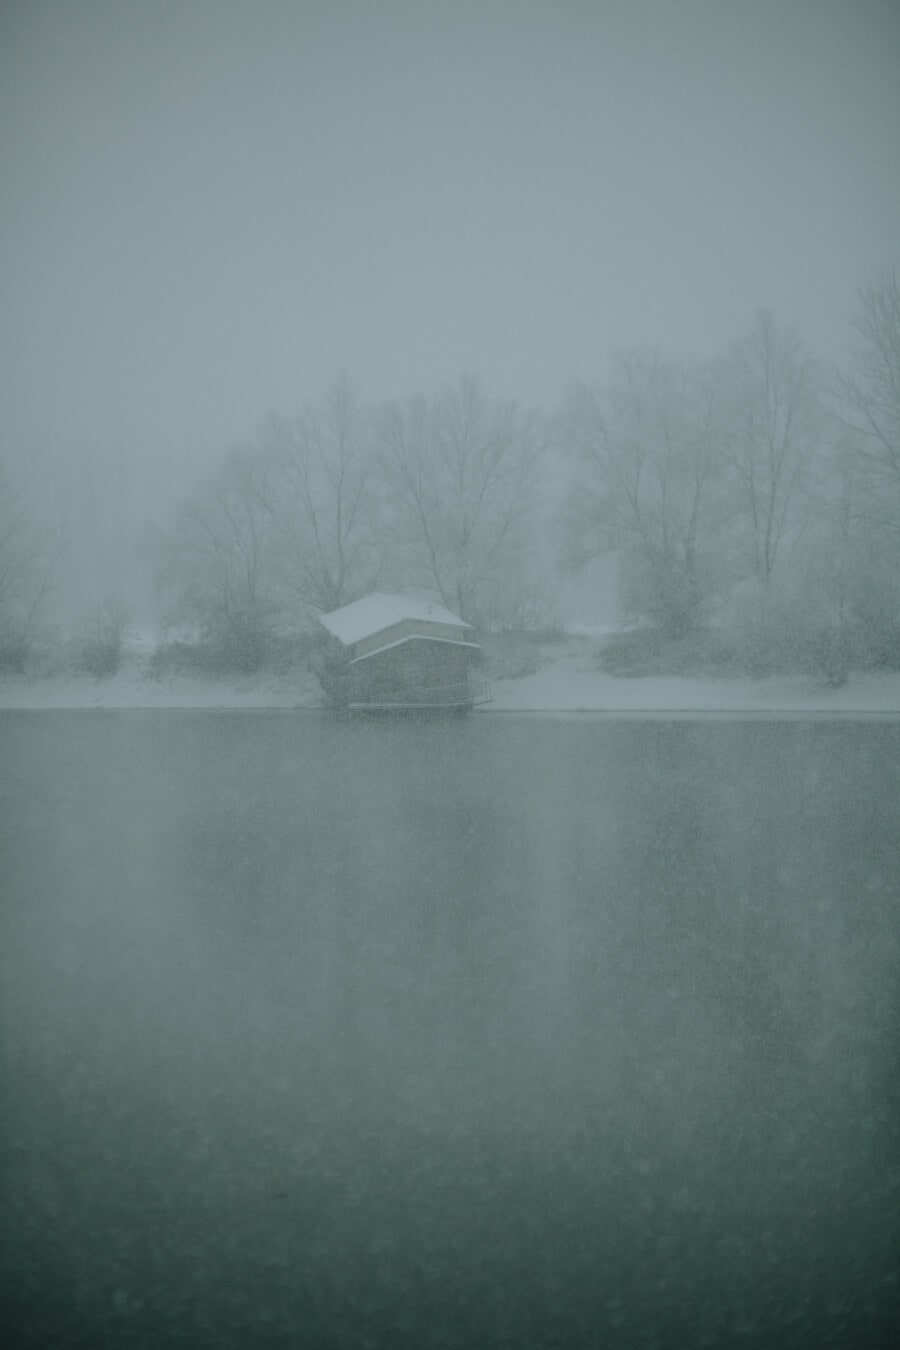 snowstorm, snowflakes, frosty, cold water, lakeside, bad weather, mist, landscape, winter, fog